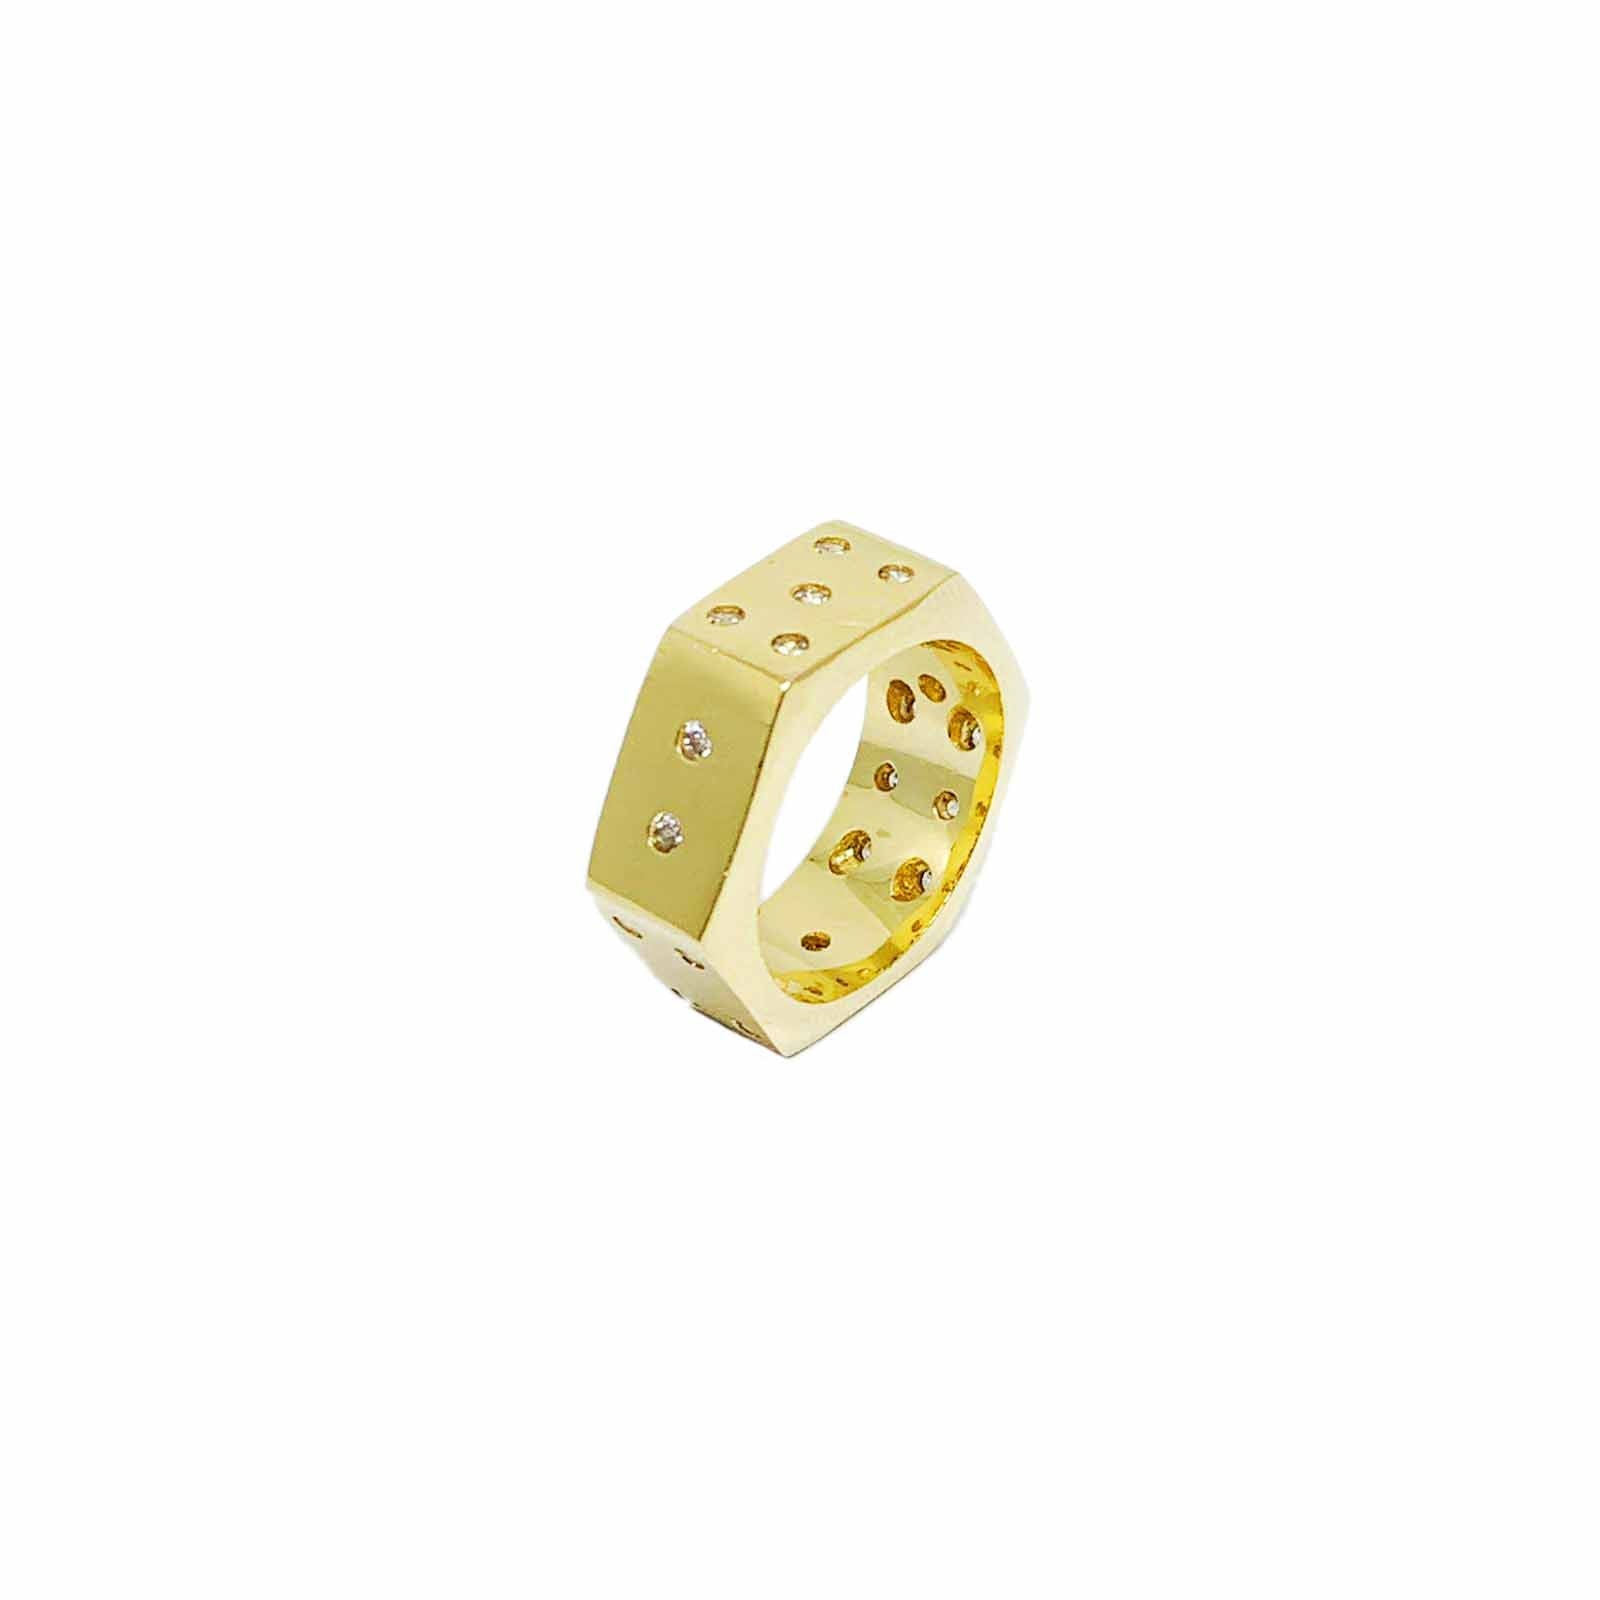 GoldFi 18k Gold Filled Dice Ring For Wholesale and Jewelry Supplies